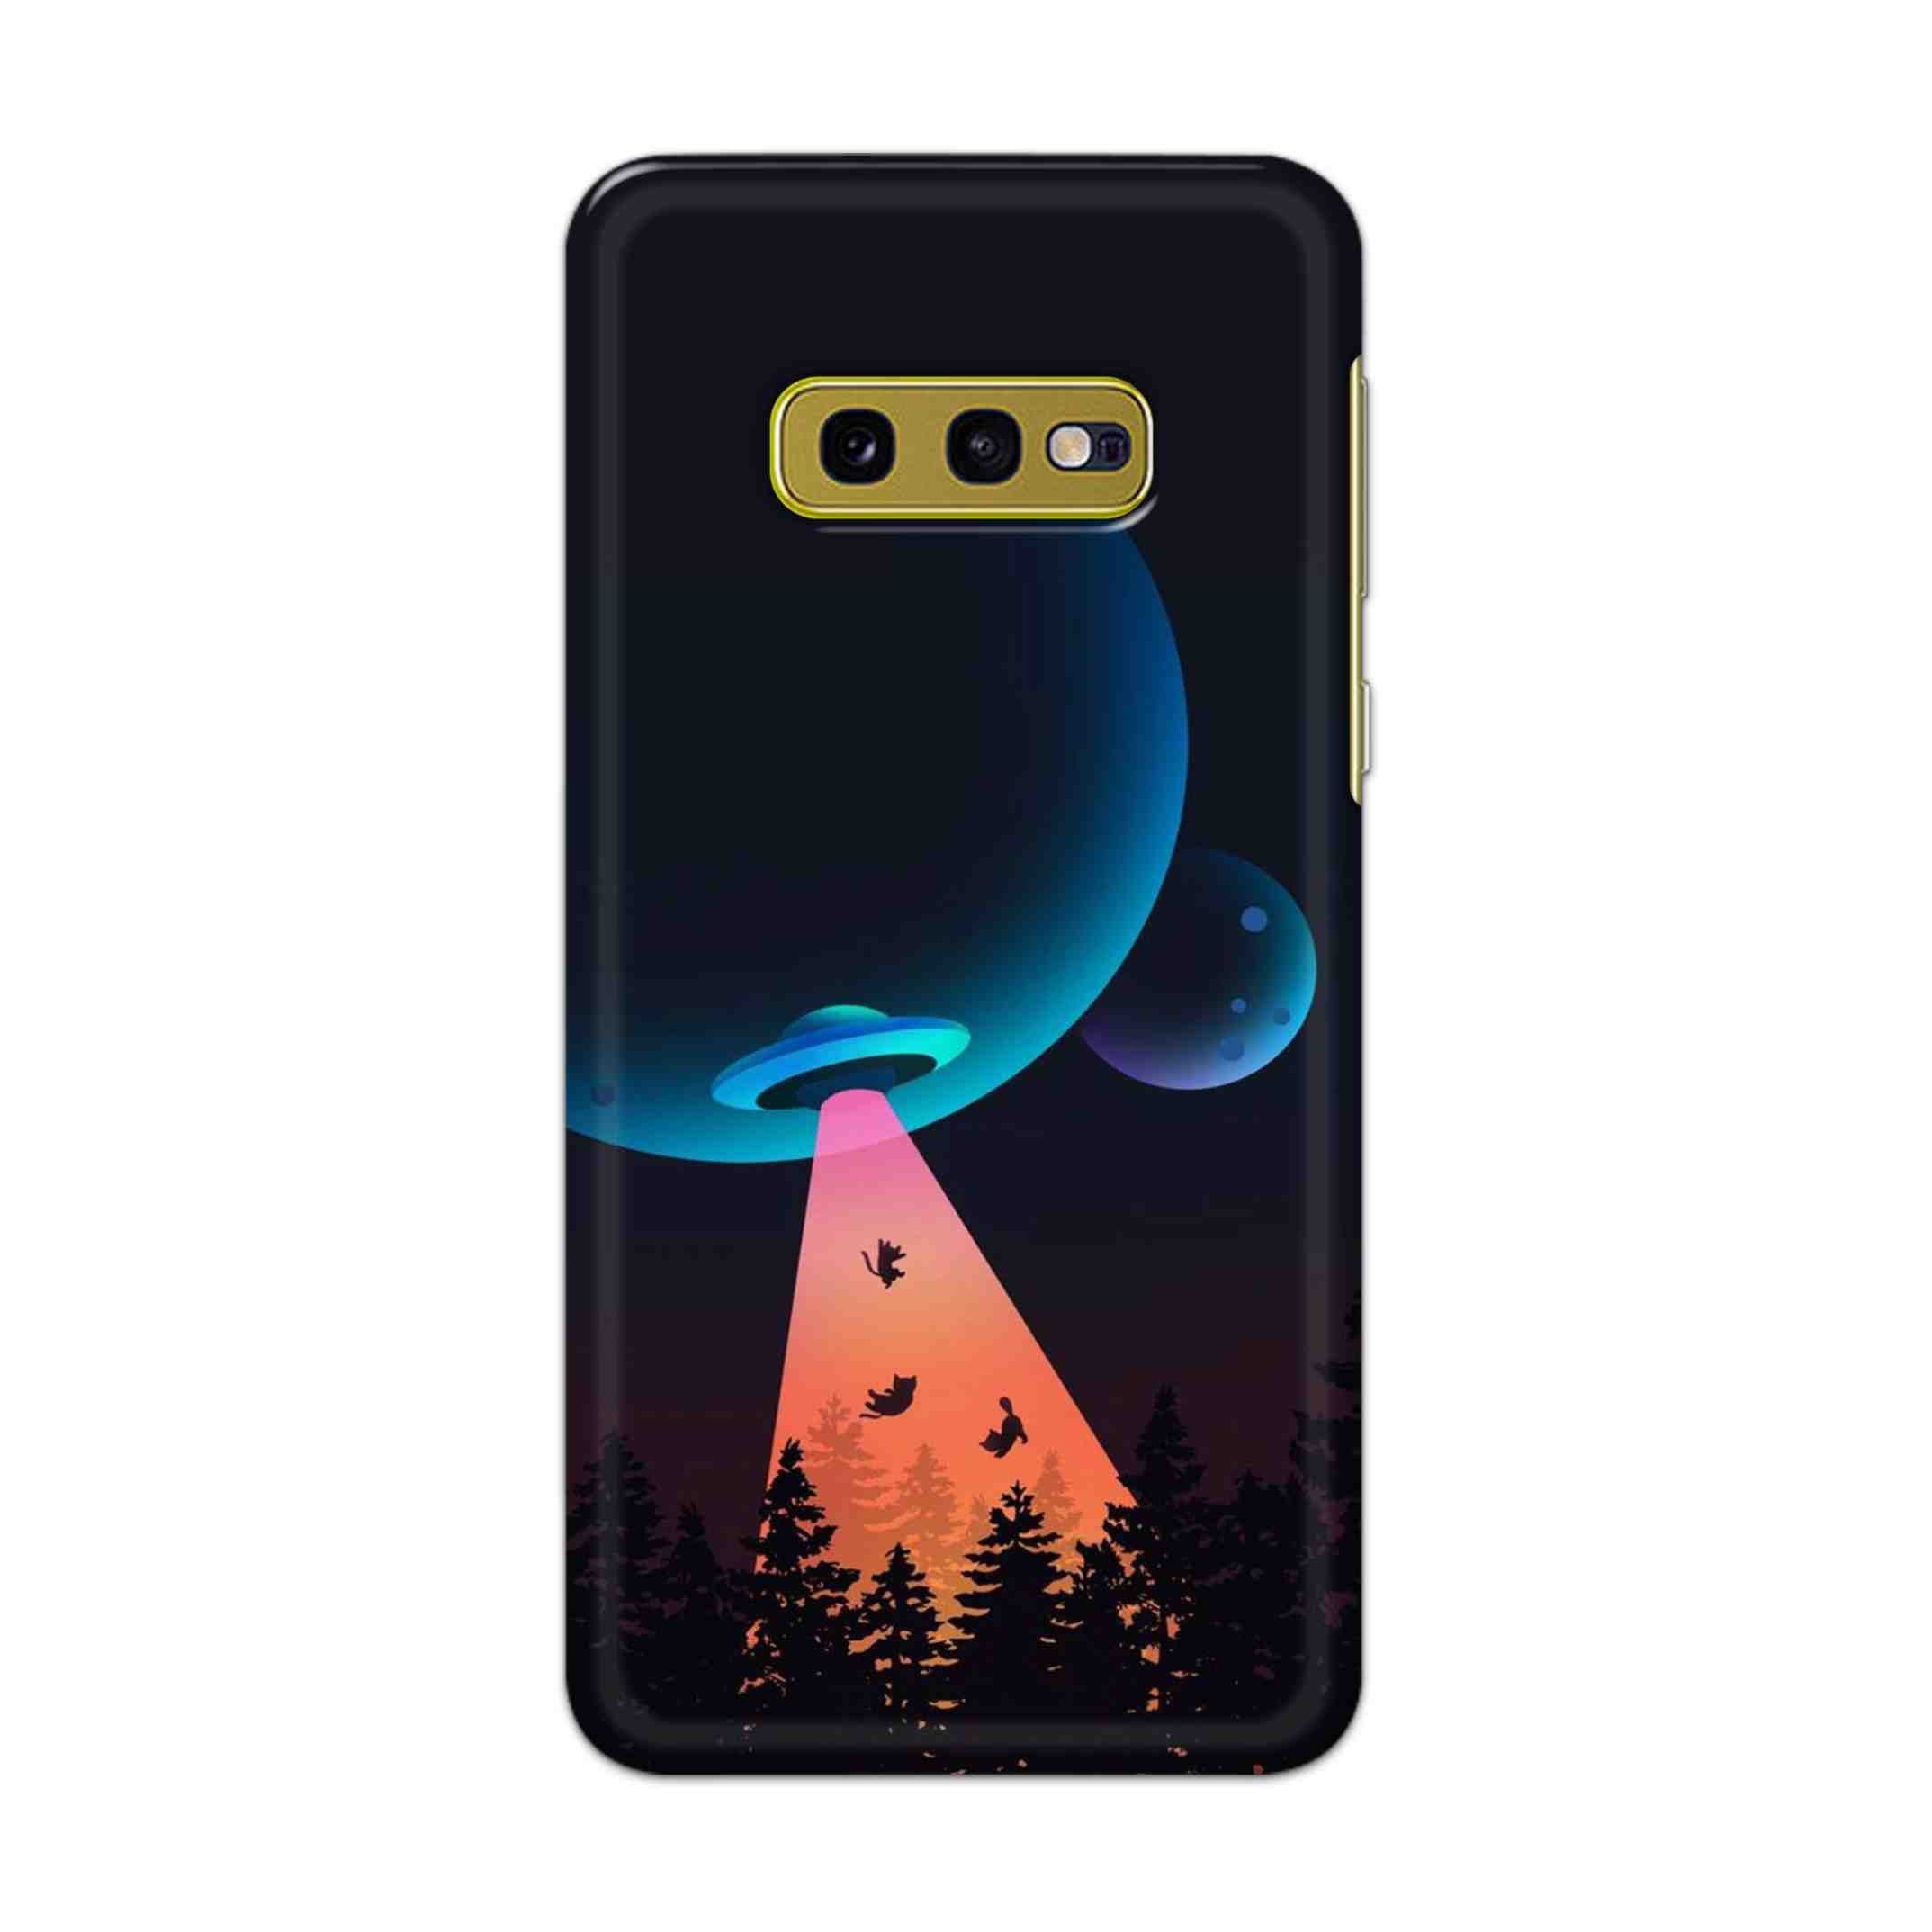 Buy Spaceship Hard Back Mobile Phone Case Cover For Samsung Galaxy S10e Online